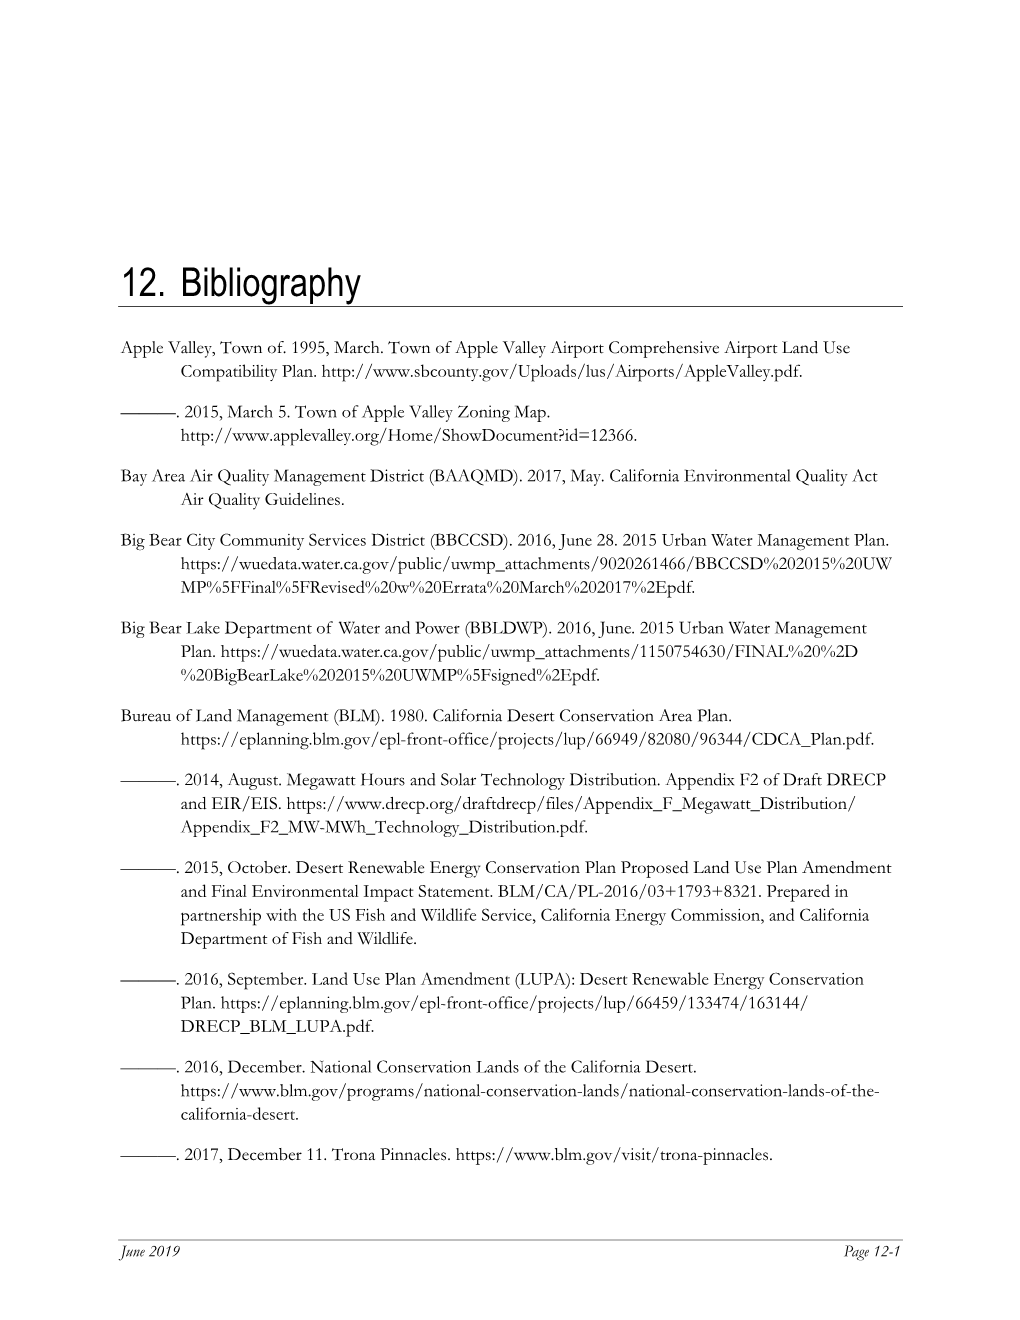 Chapter 12) Bibliography